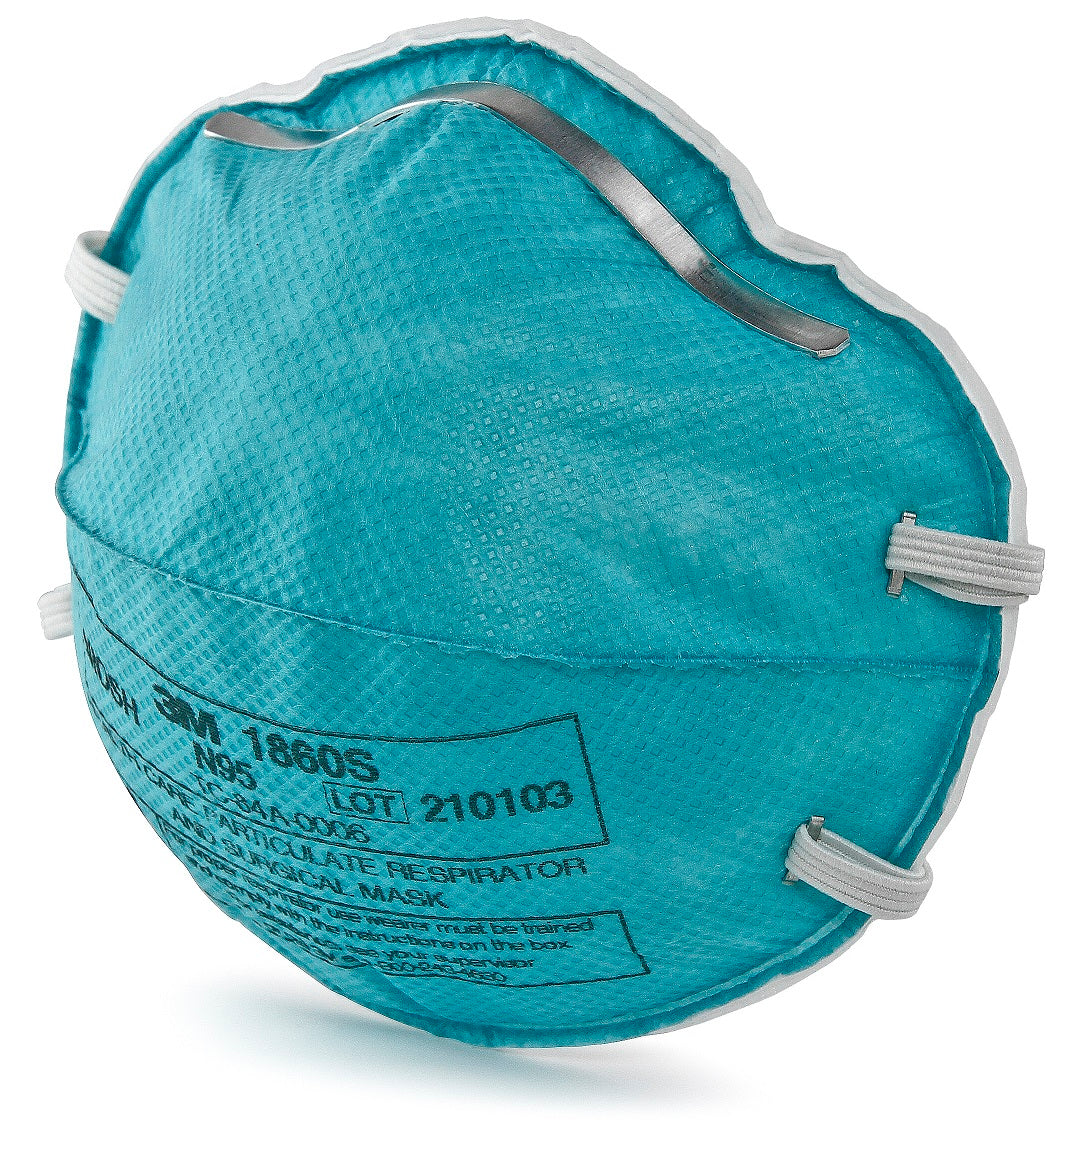 3M Canada 1860S Small NIOSH N95 Blue Teal Cup Surgical Respirator Front view